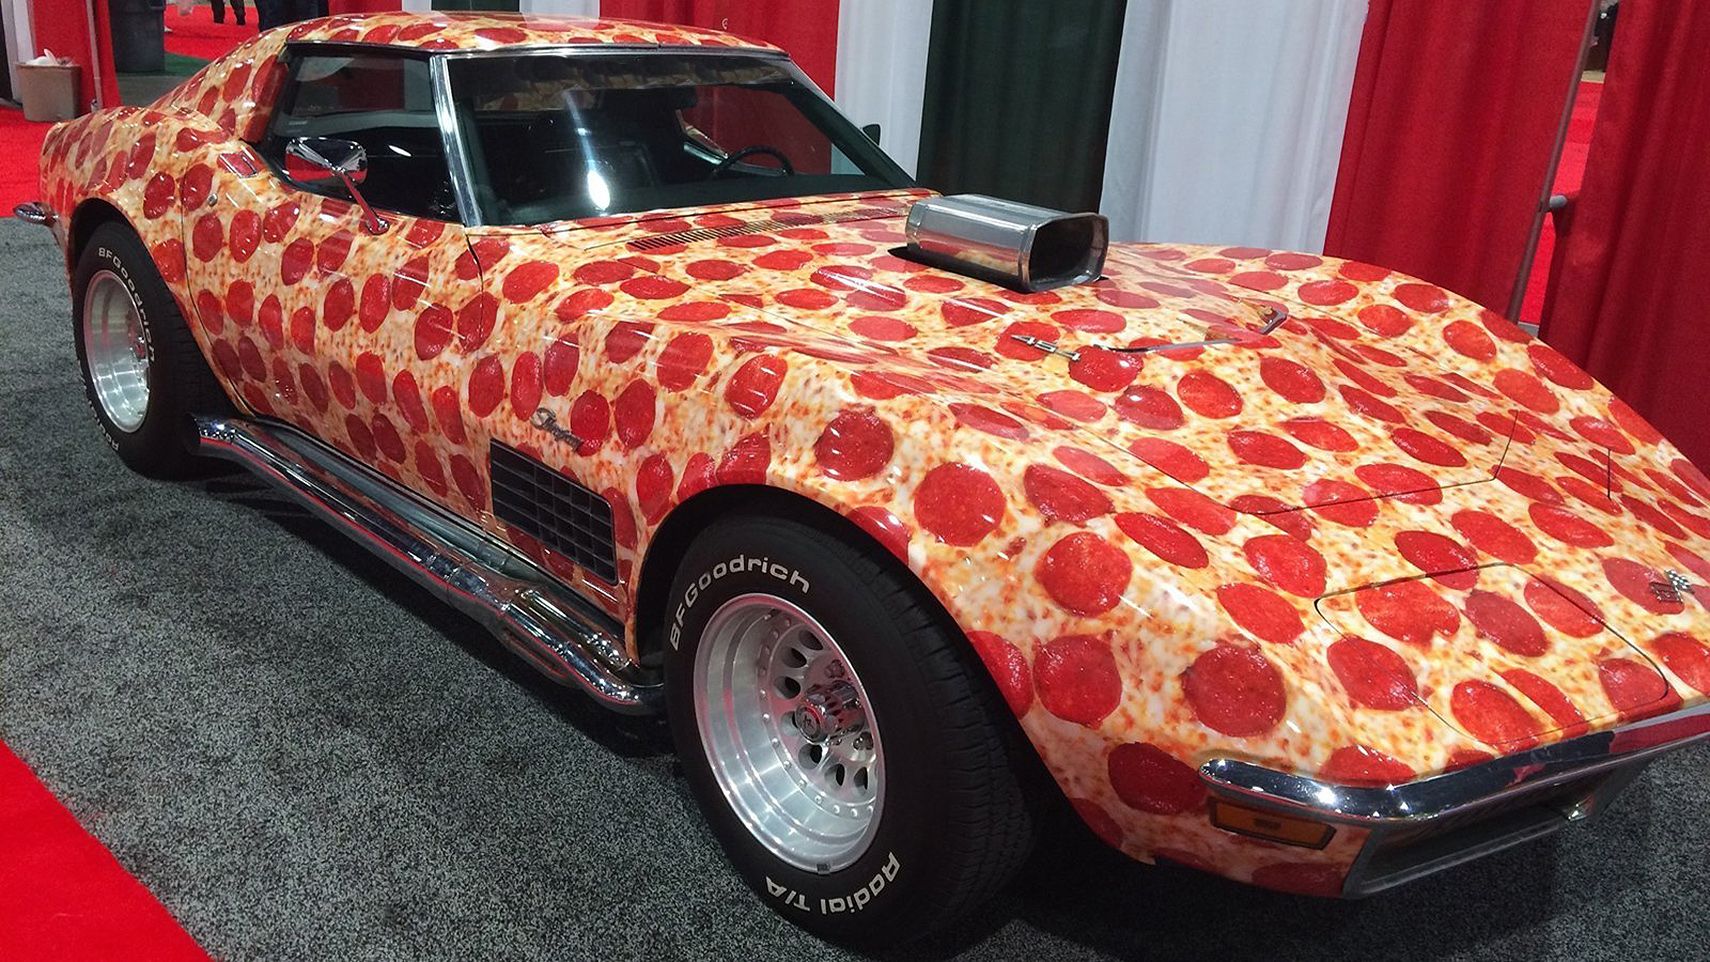 Why Does This ‘Vette Love Pepperoni?